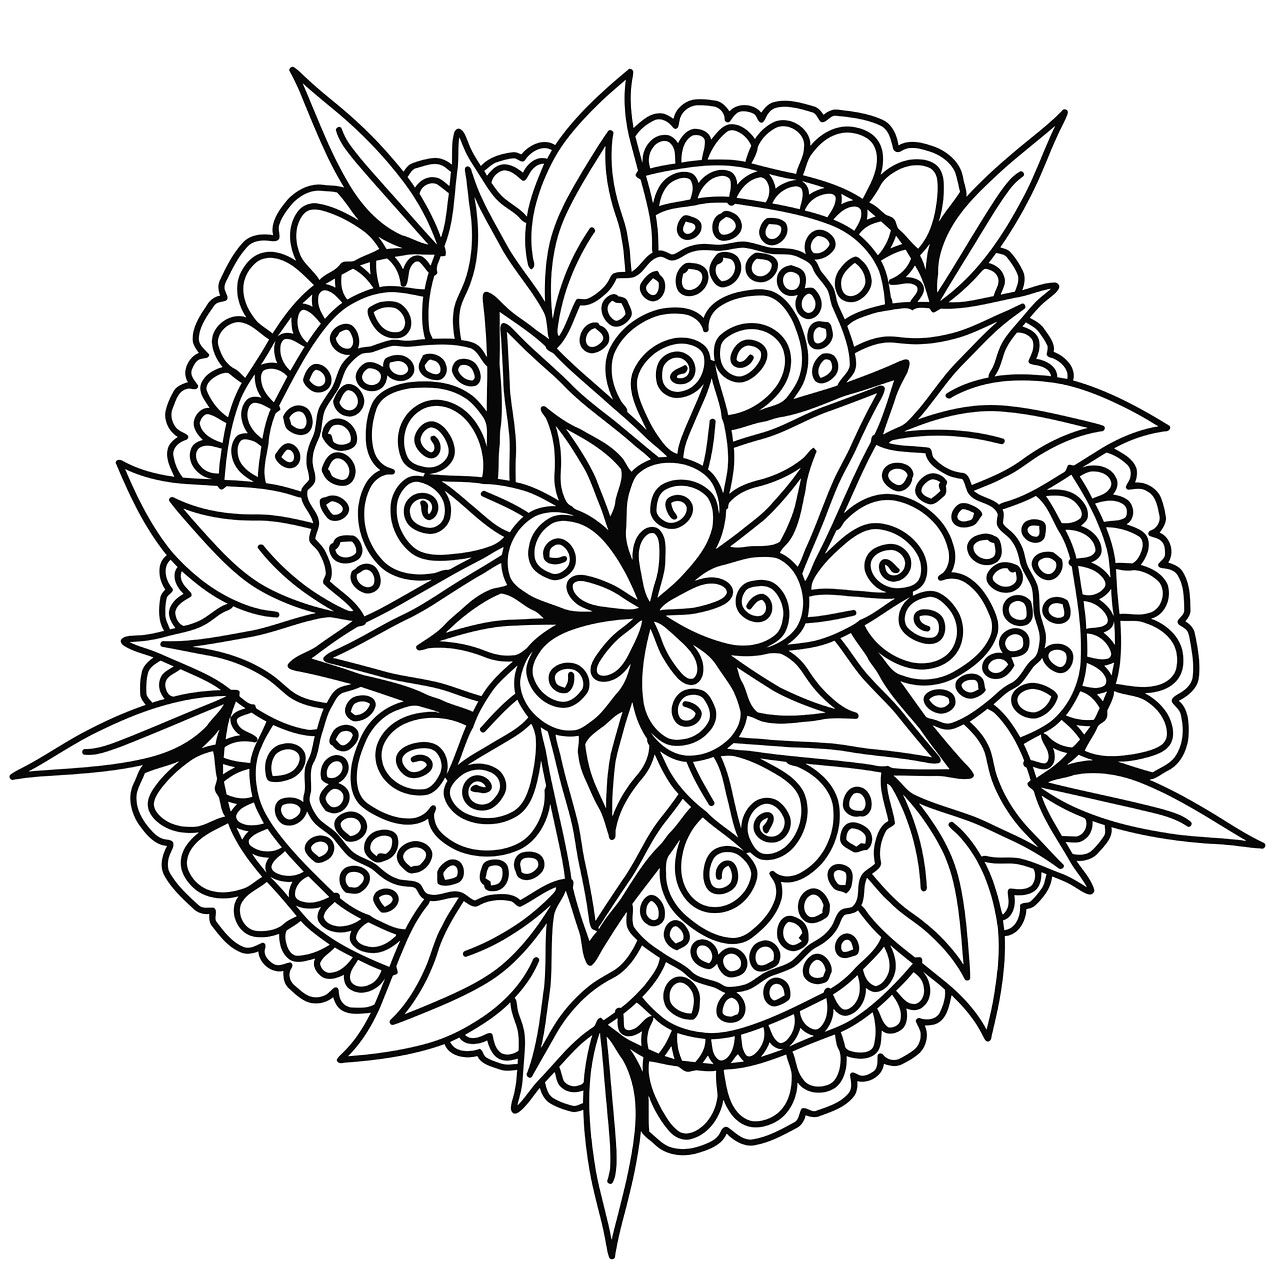 For this cool hand drawn Mandala, you can use few or many colors, it's like you prefer. You must clear your mind and allow yourself to forget all your worries and responsibilities.